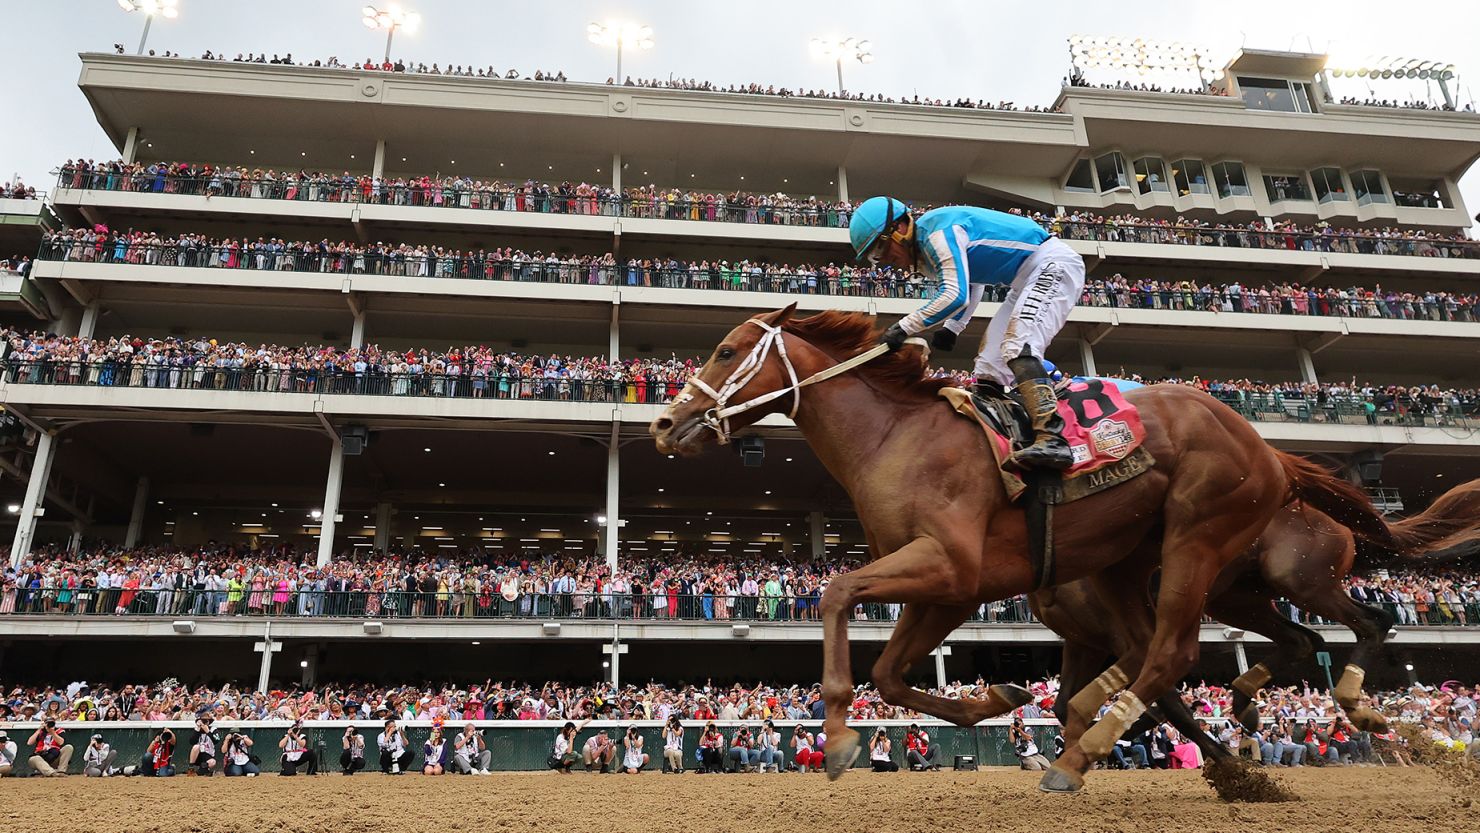 The Kentucky Derby is probably the most unique sporting event in the United States.